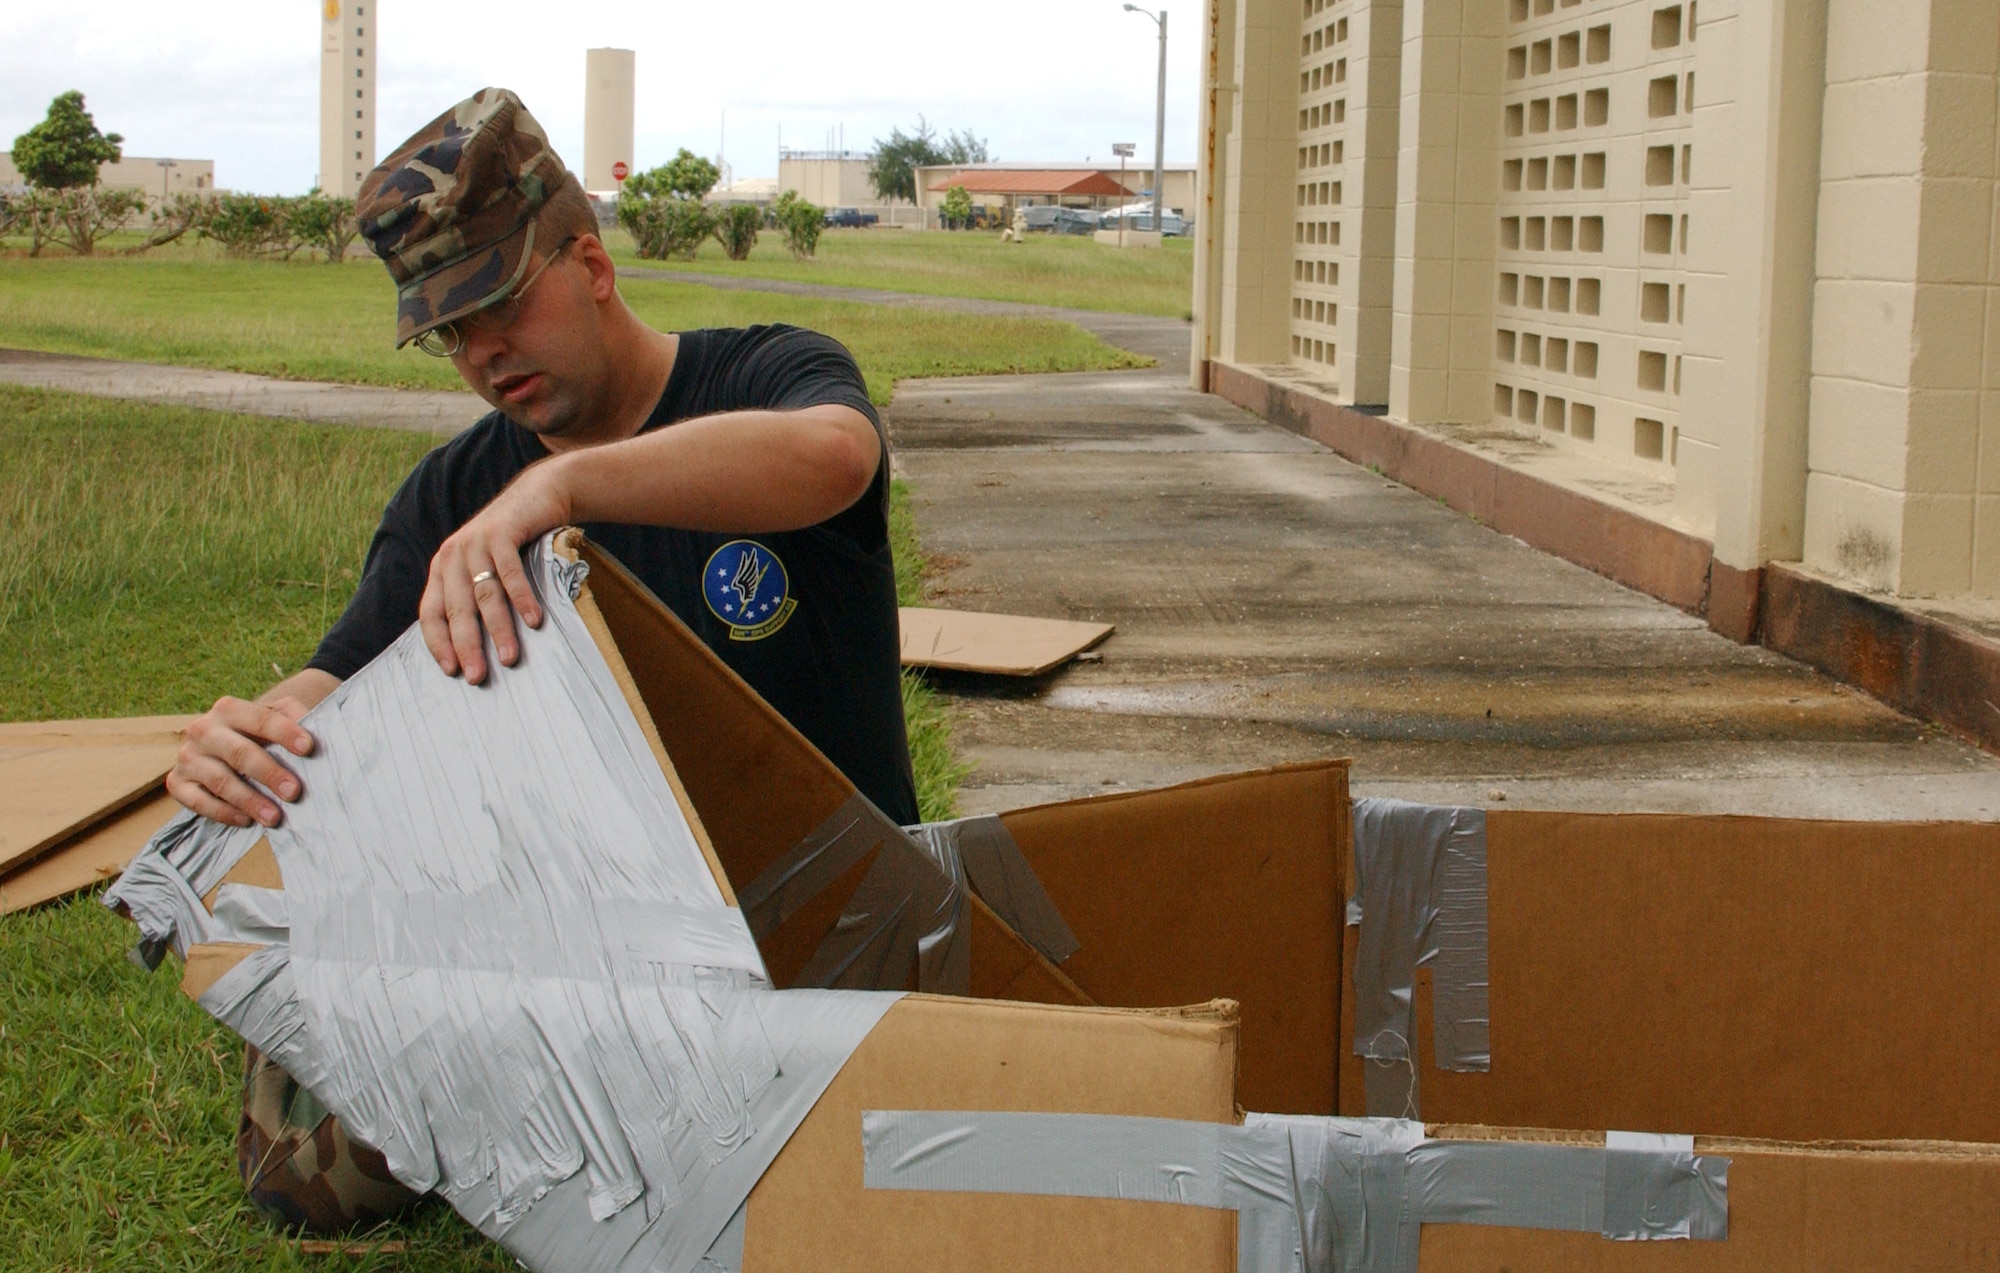 Staff Sgt. David Andrews, 393rd EBS combat crew communications specialist, begins taping the tapered bow of what eventually will become the USS Fat Chance. Fat Chance was entered in the Team Andersen Challenge cardboard boat race and finished third. It was the only vessel to have a hull completely ensconced in duct tape. Sergeant Andrews doesn’t recall exactly how much length of tape he used, but did say it “was about $15 worth.” (Air Force photo/Tech. Sgt. Steven Wilson)